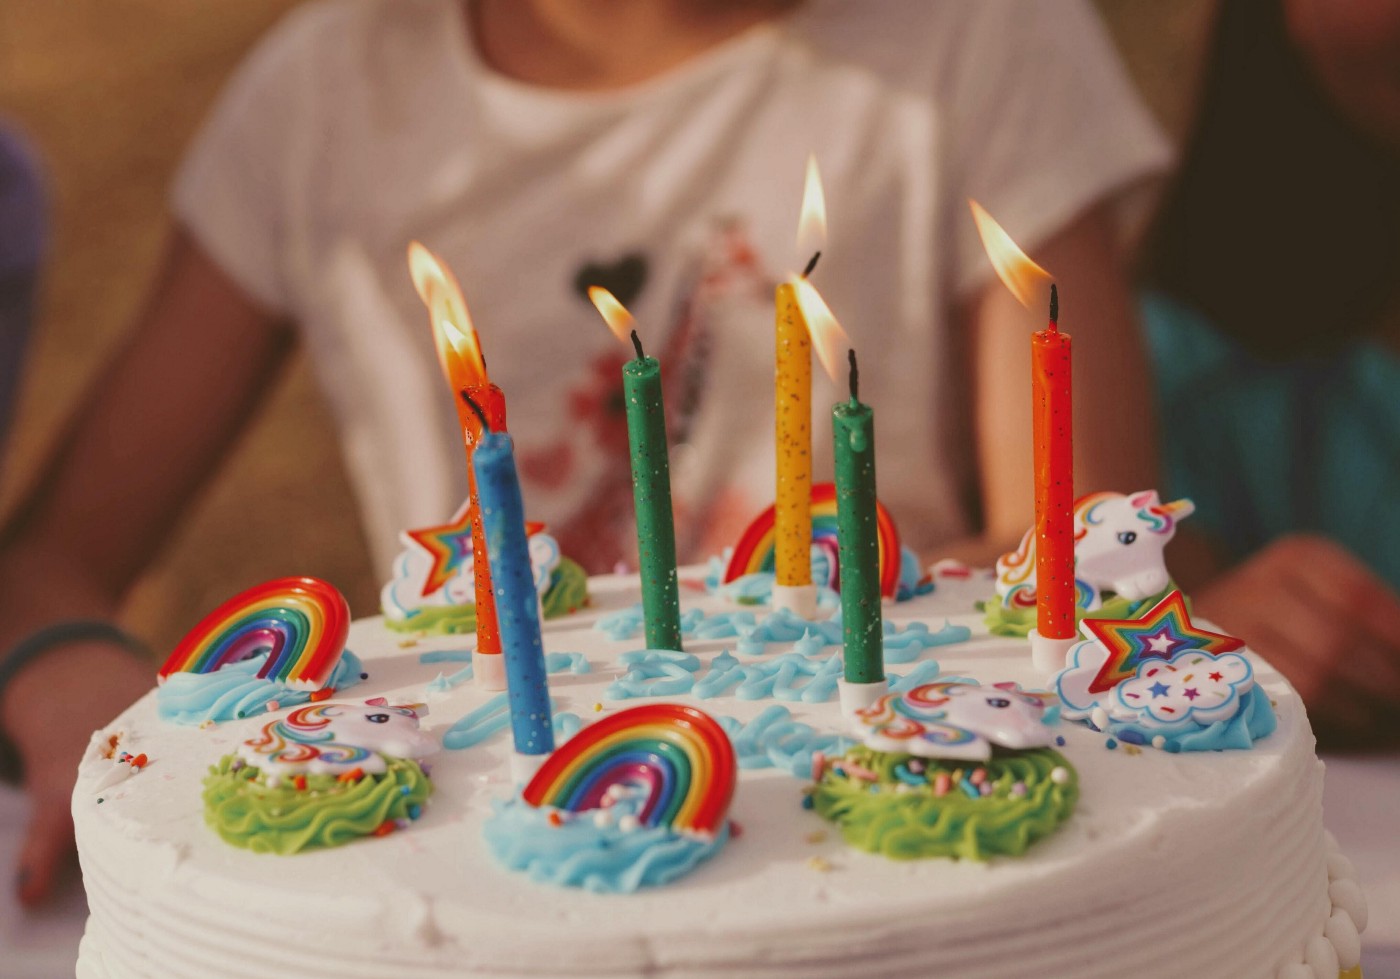 5 Simple Ways to Celebrate Your Child’s Birthday during Lock-down